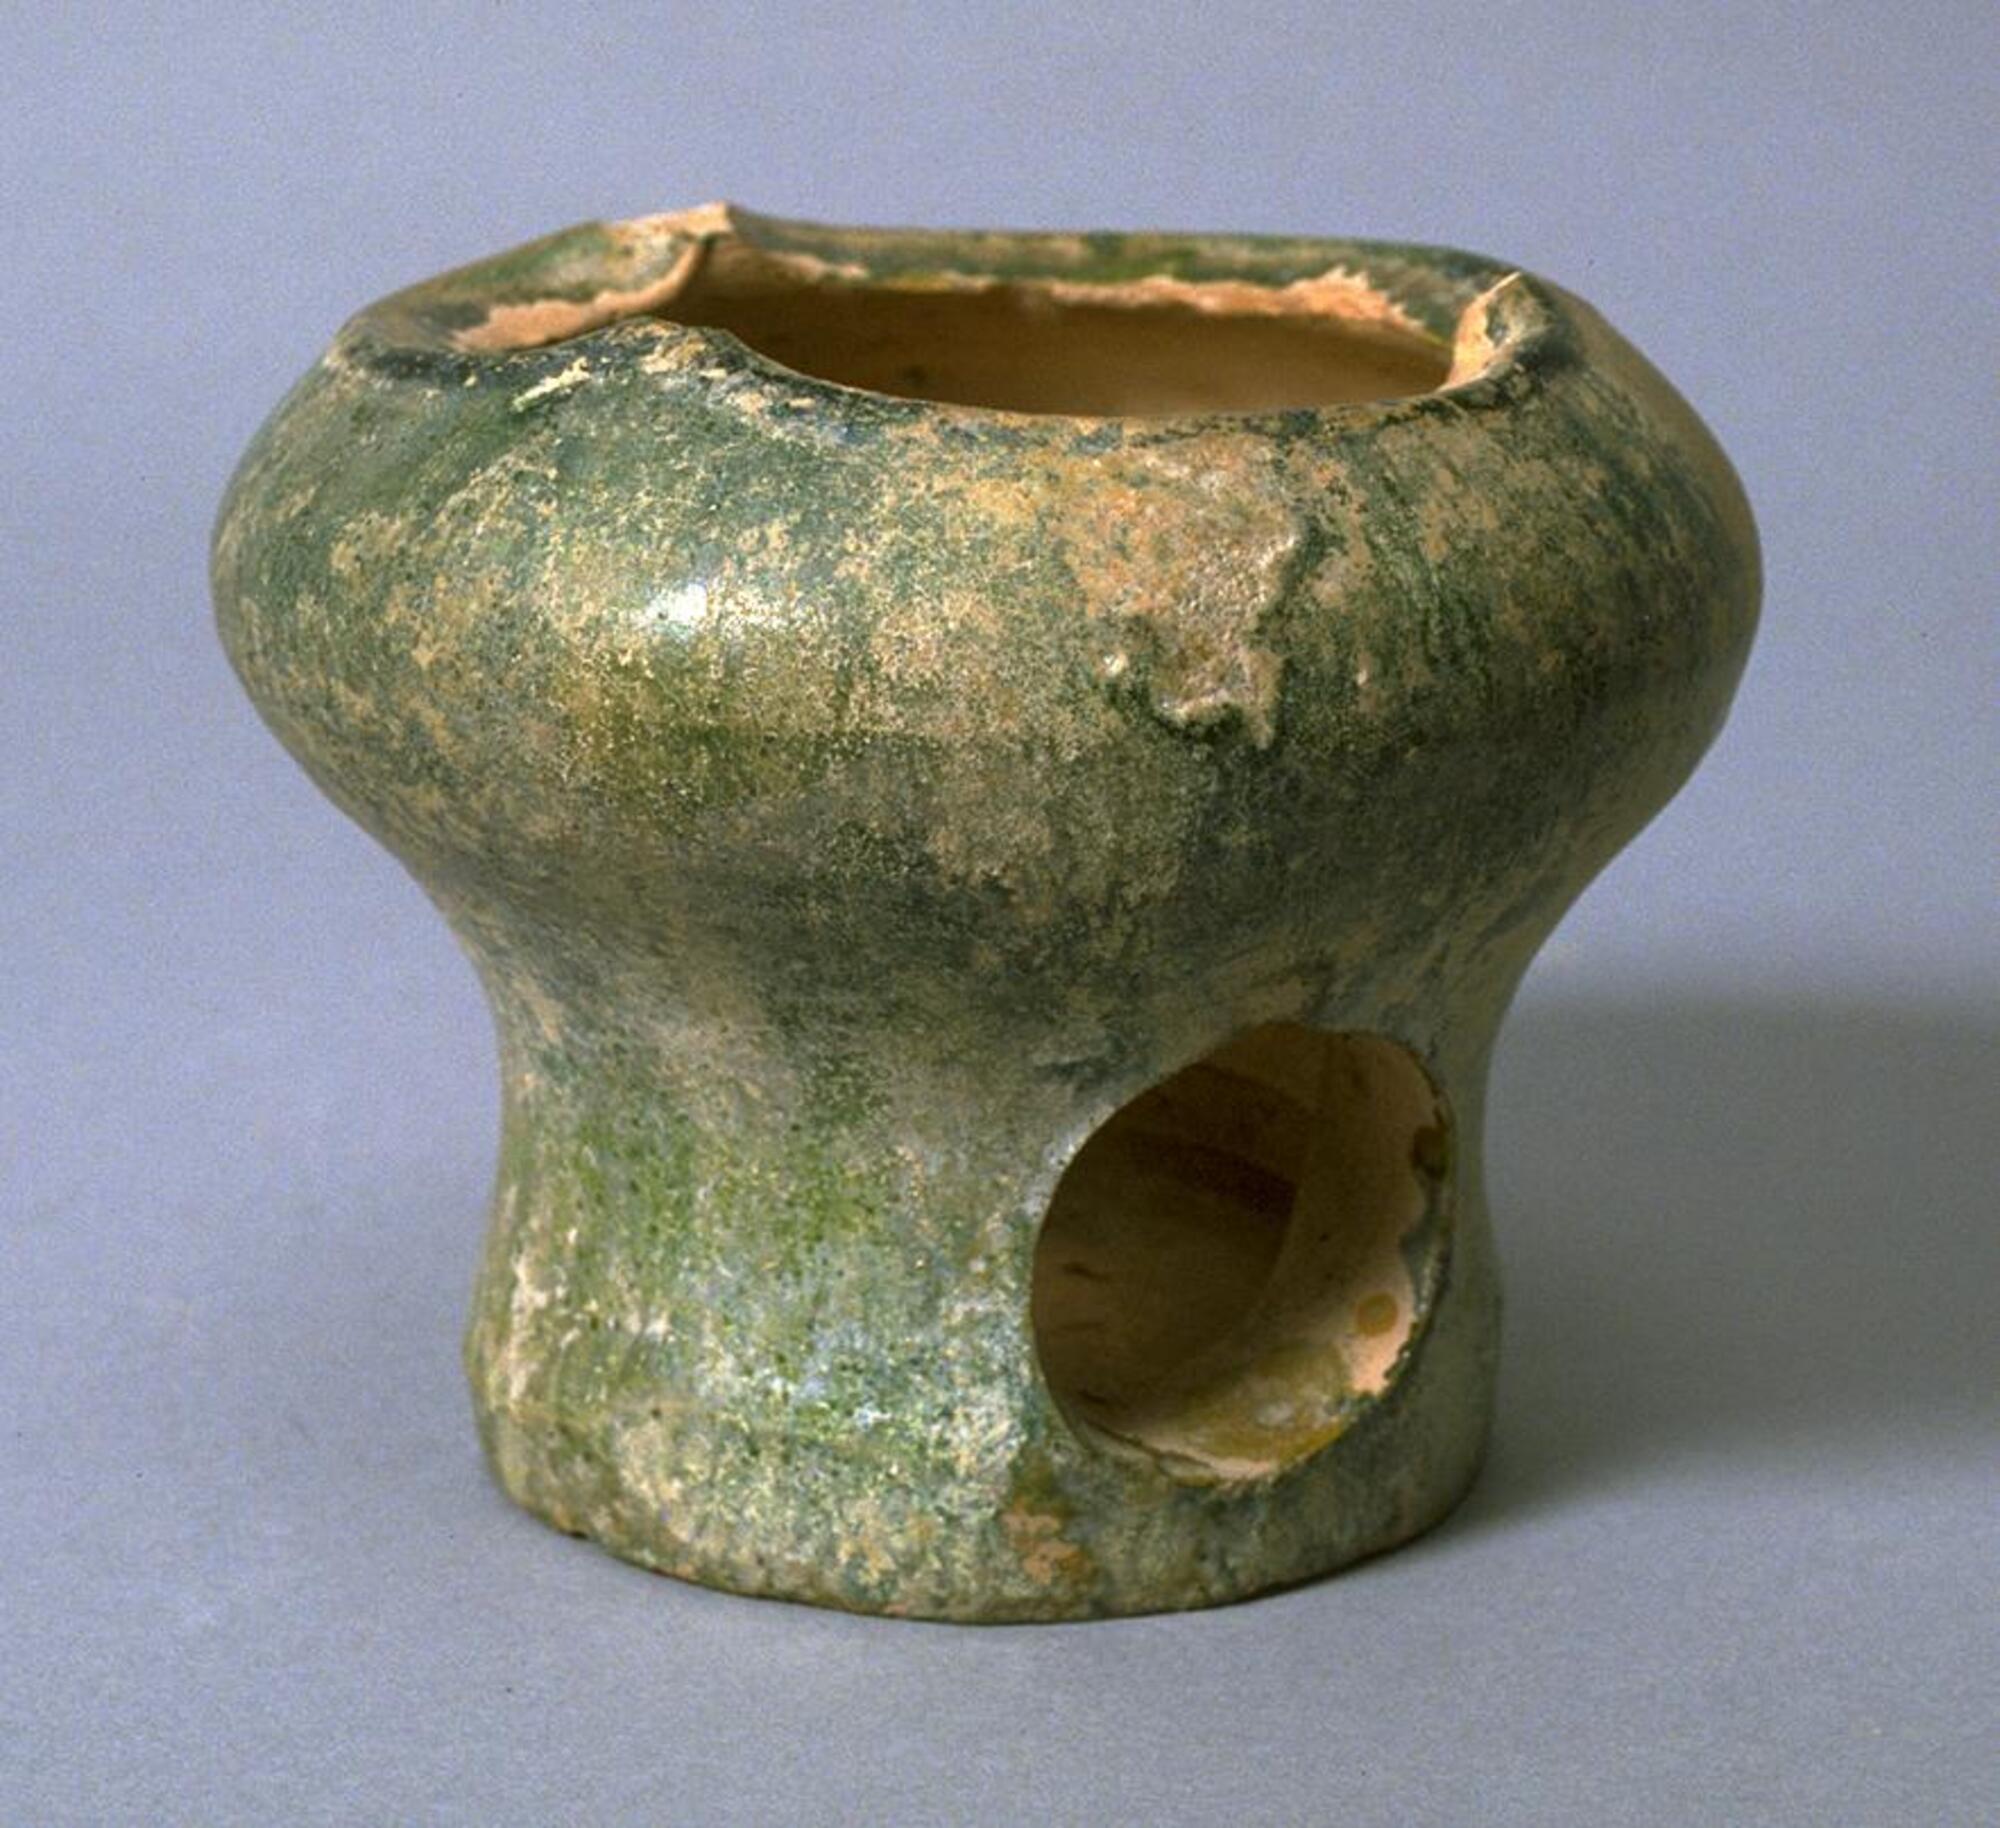 A red earthenware, small, flat-bottomed pot with narrow base and wide bulbous neck with three protrusions at the rim, a large circular hole pierced into the side of the lower body, covered in a green lead glaze with iridescence and calcification. 